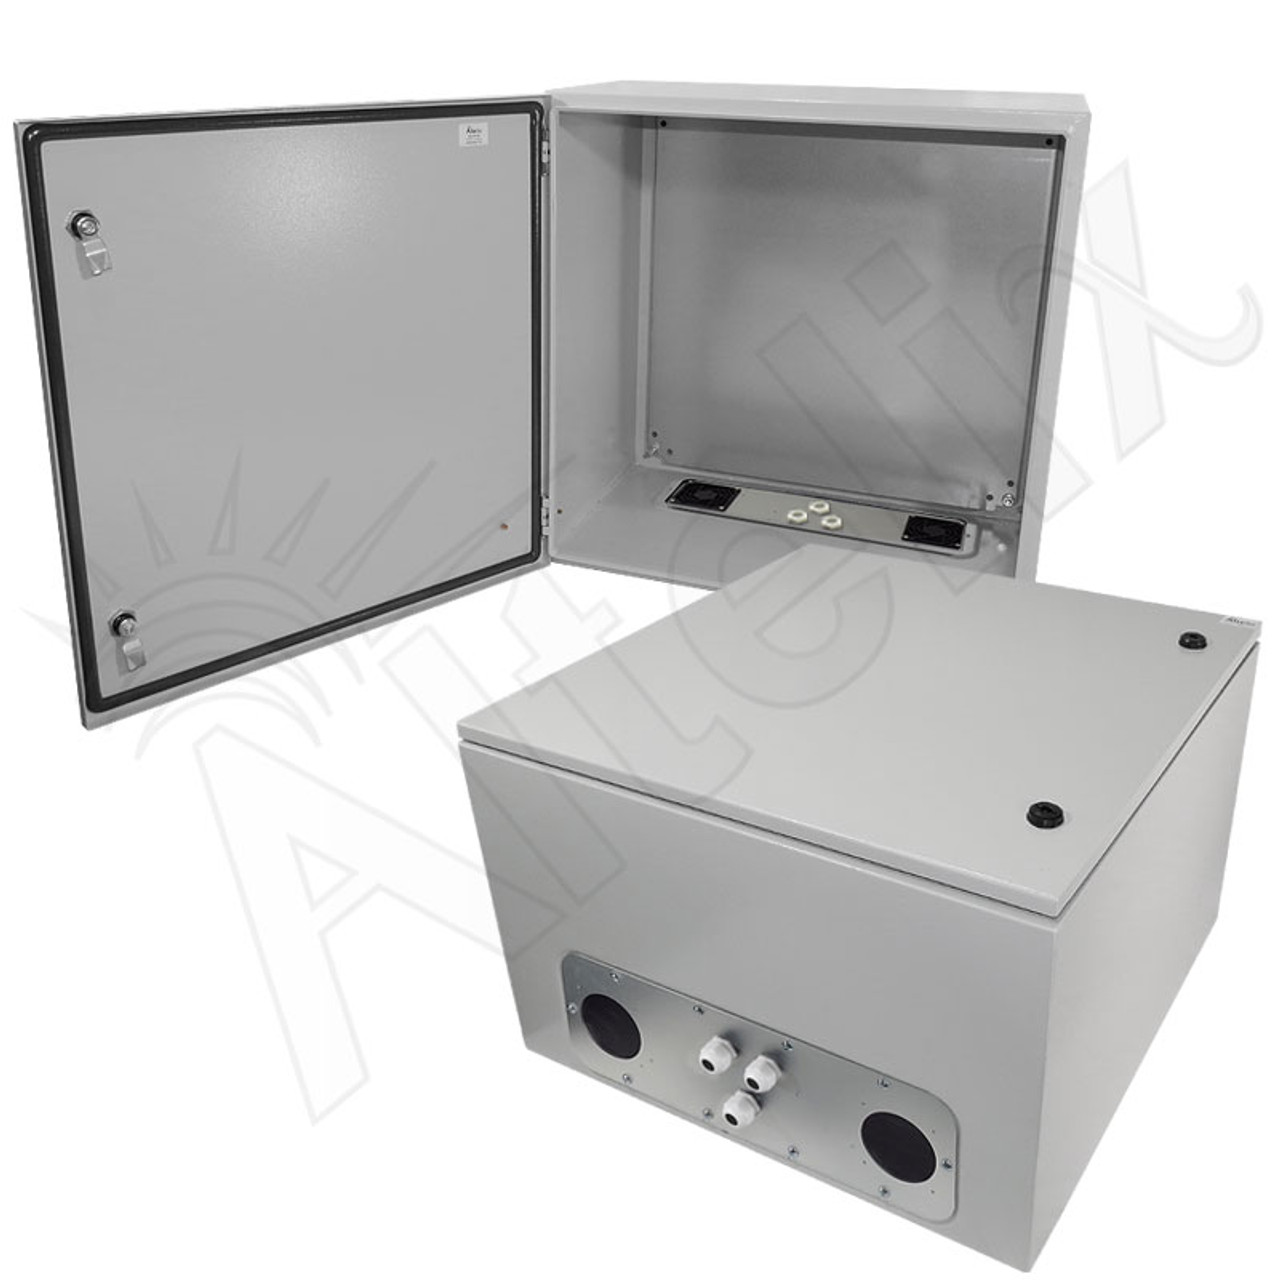 Altelix 24x24x16 Stainless Steel Weatherproof NEMA Enclosure with Heavy  Duty 19 Wide Adjustable 8U Rack Frame, Dual Cooling Fans, Single 120 VAC  Duplex Outlet and Power Cord - Altelix